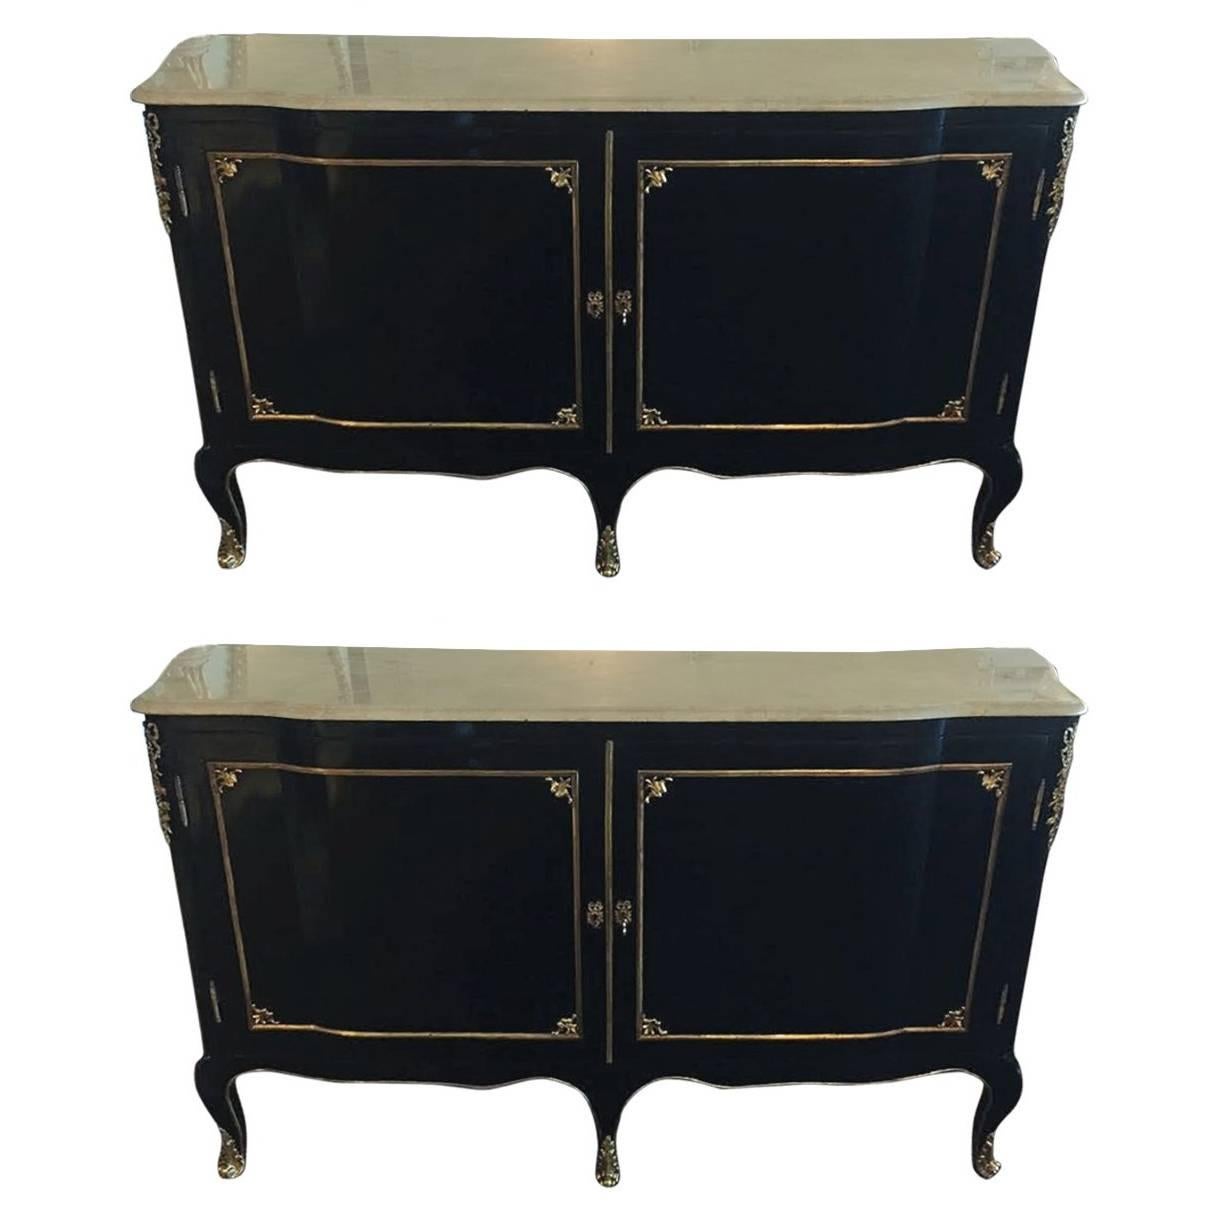 Pair of Palatial Marble-Top or Commodes with Bronze Mounts attrib to Jansen 